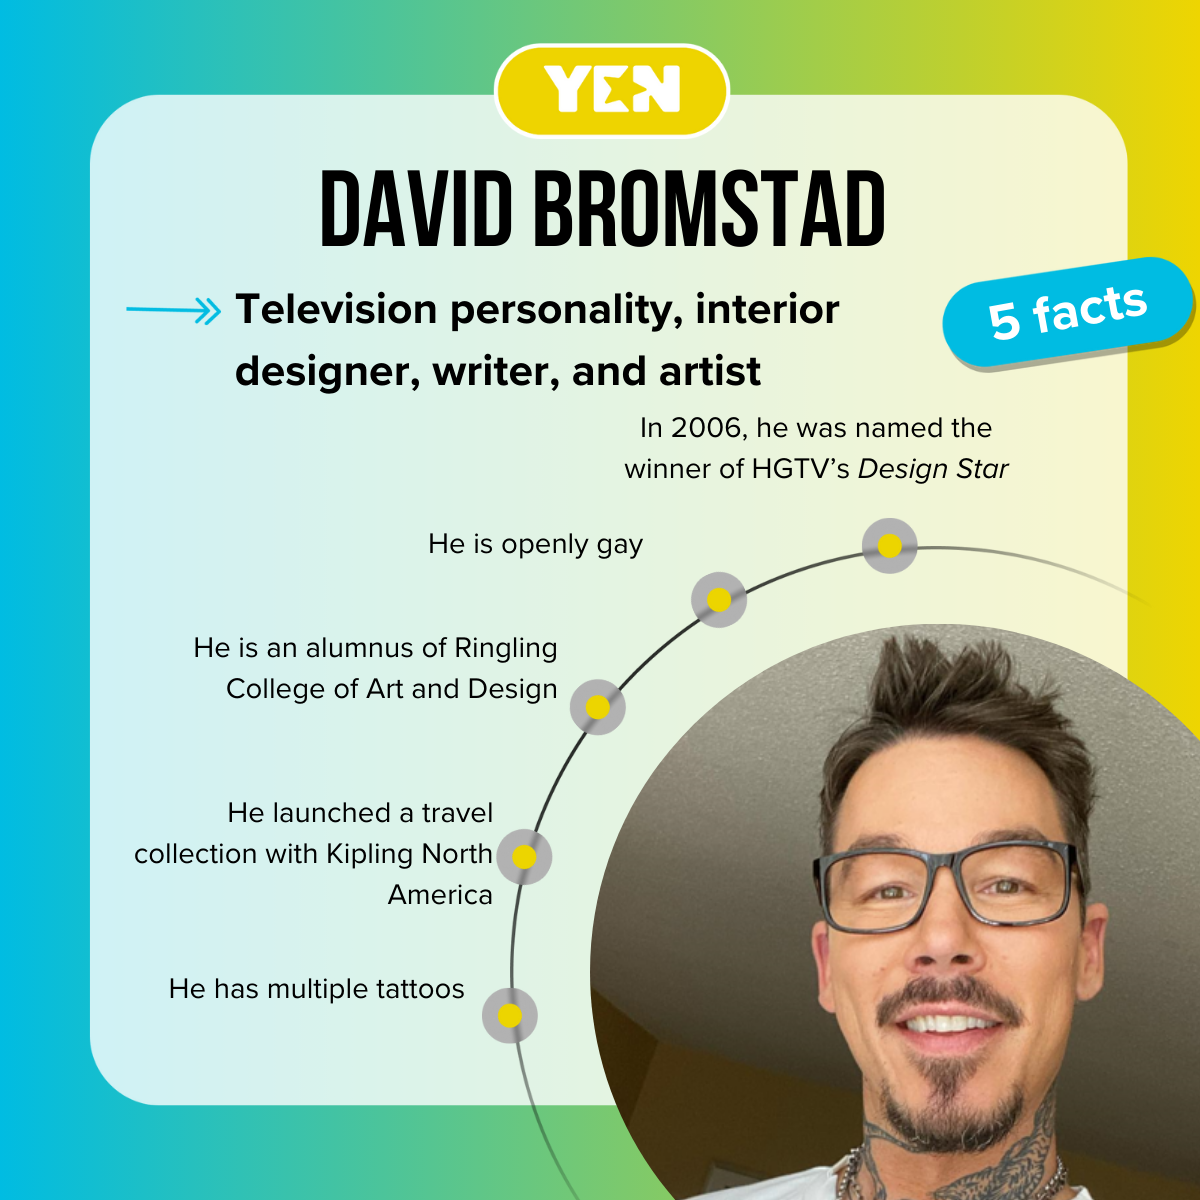 Top-5 facts about David Bromstad